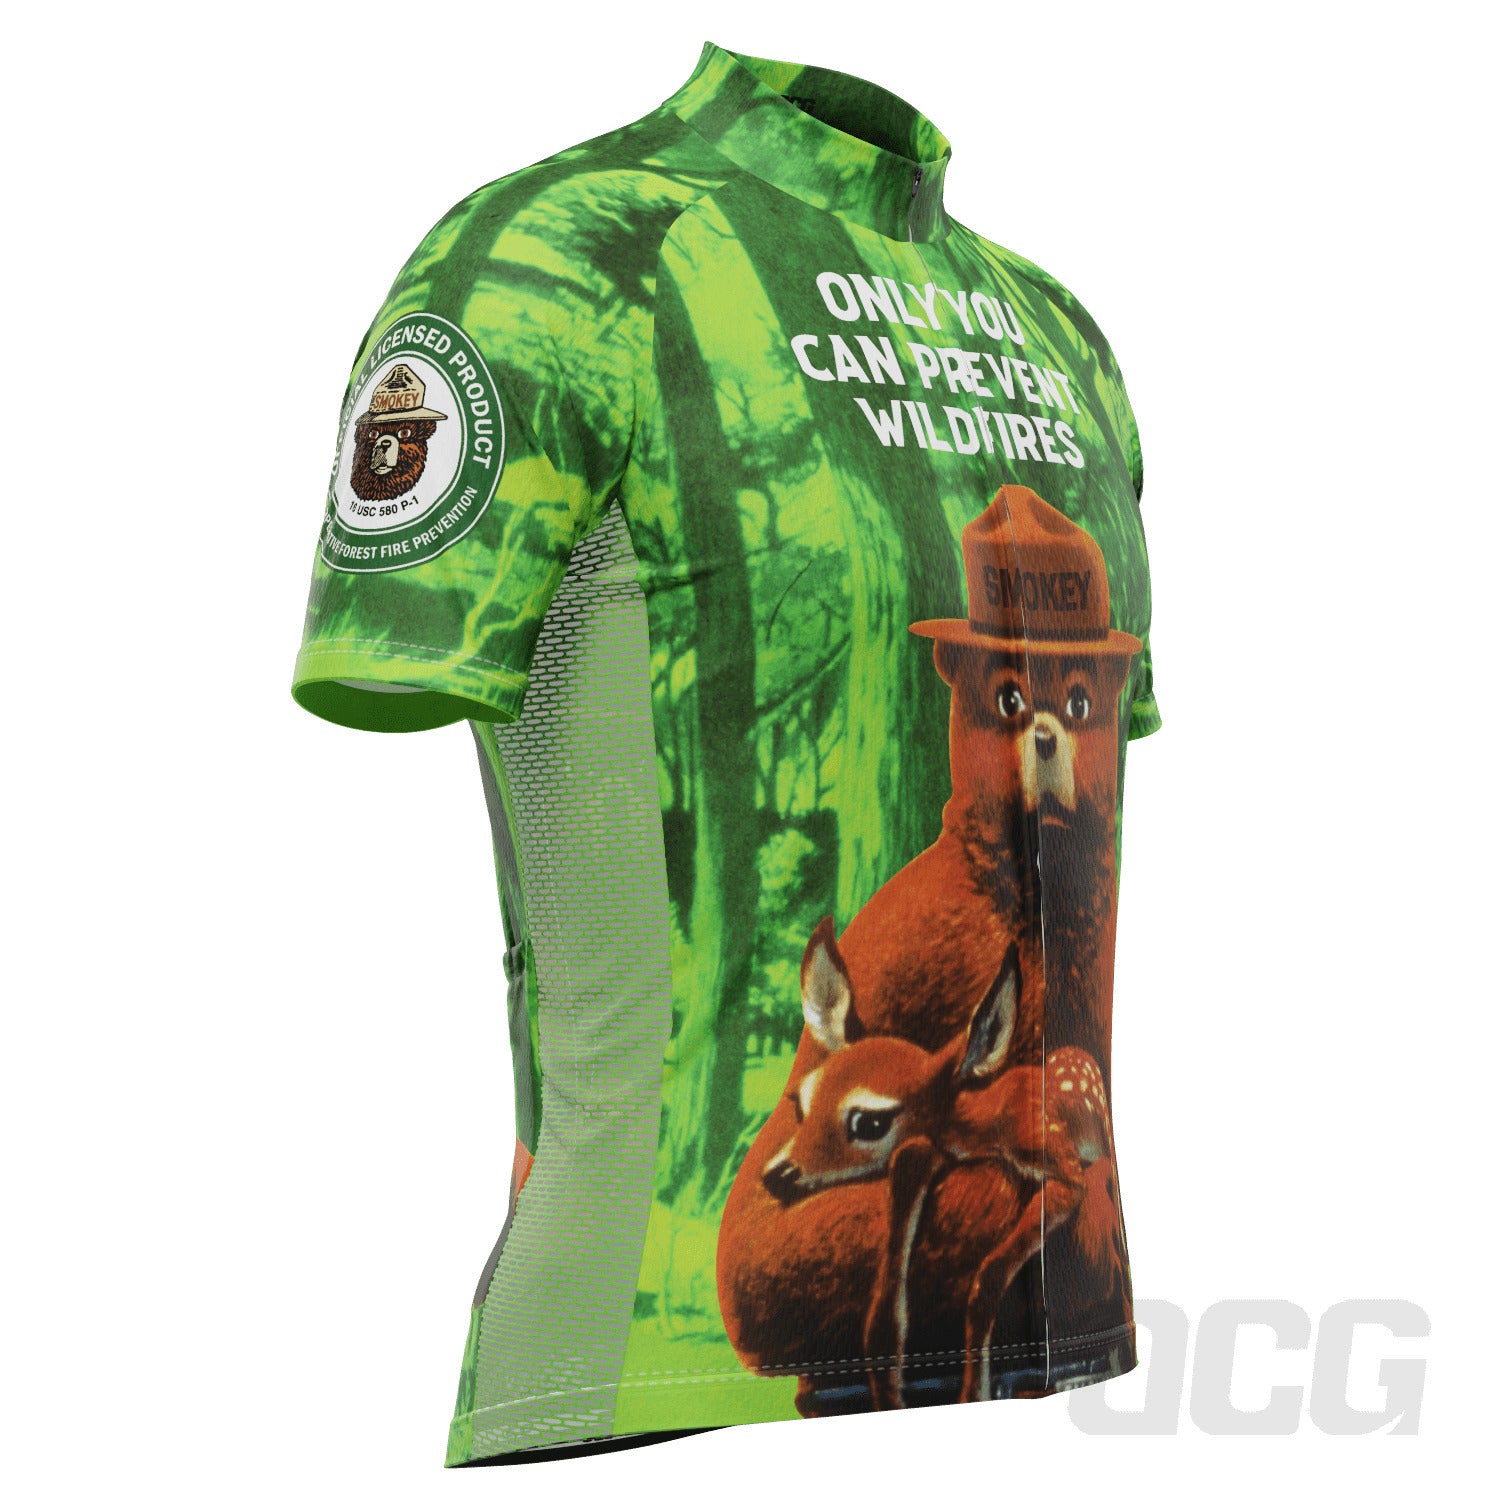 Men's Smokey Bear Prevent Wildfires Country  Short Sleeve Cycling Jersey